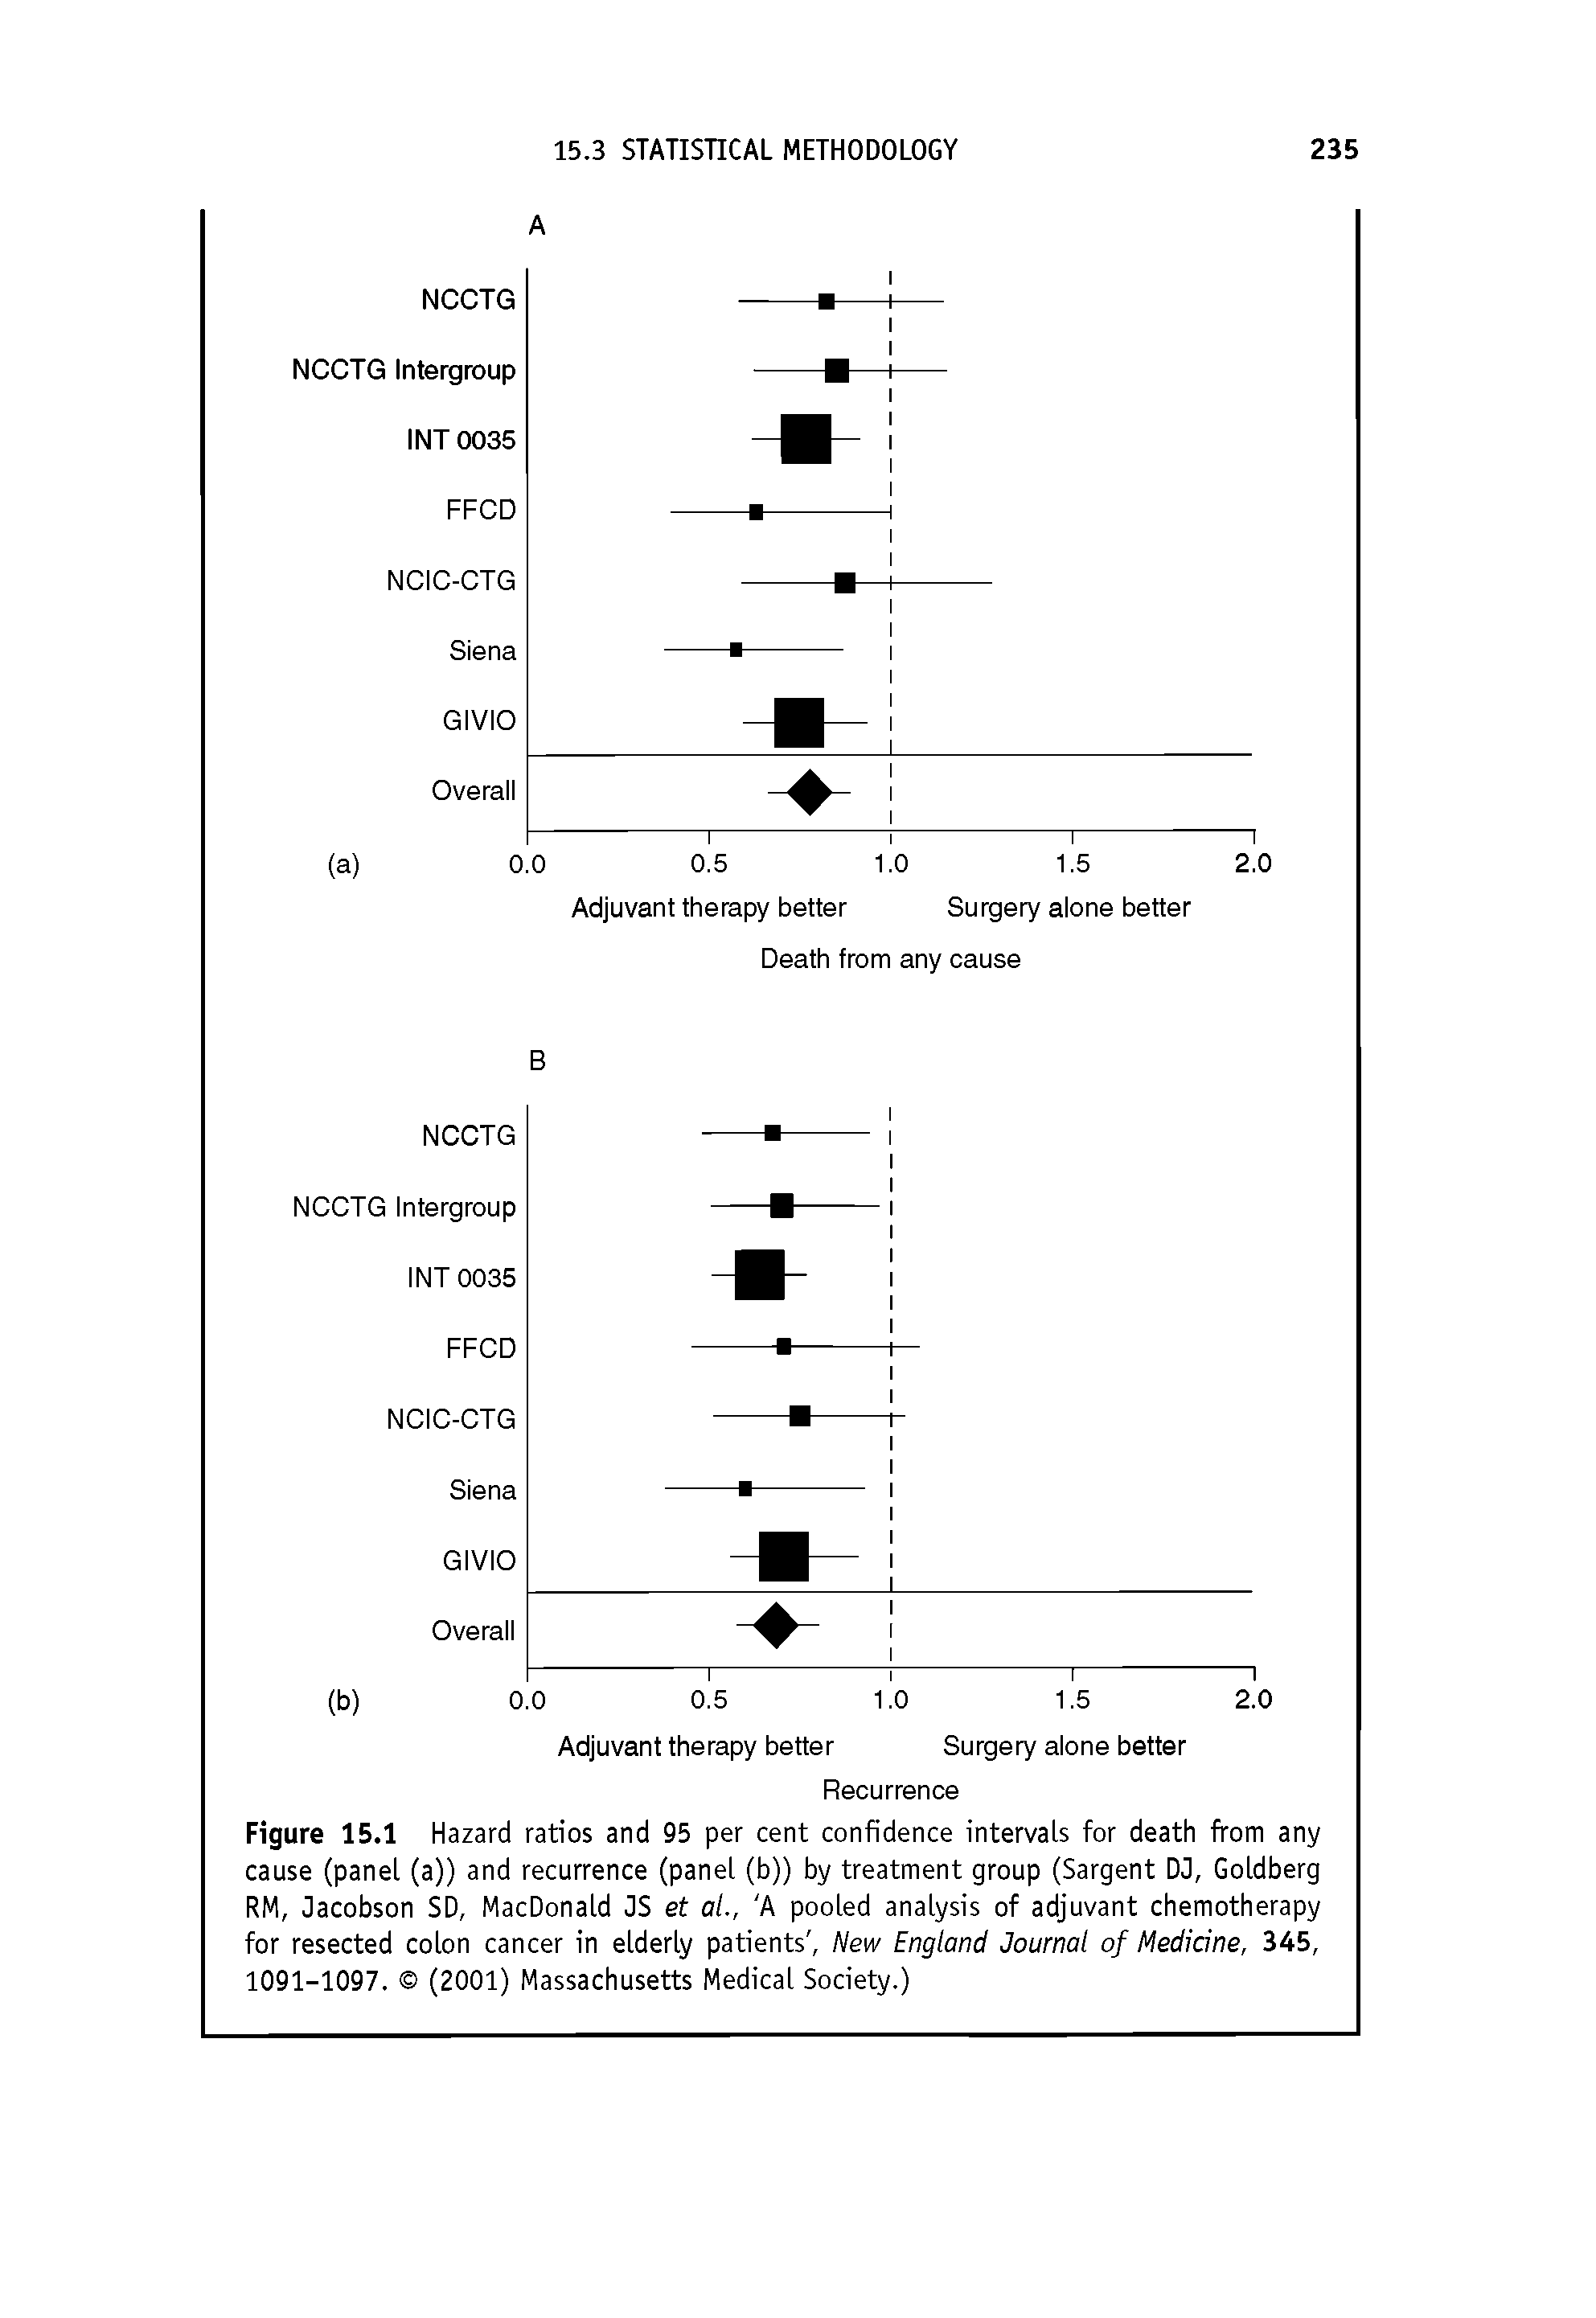 Figure 15.1 Hazard ratios and 95 per cent confidence intervals for death from any cause (panel (a)) and recurrence (panel (b)) by treatment group (Sargent DJ, Goldberg RM, Jacobson SD, MacDonald JS et al., A pooled analysis of adjuvant chemotherapy for resected colon cancer in elderly patients. New England Journal of Medicine, 345, 1091-1097. (2001) Massachusetts Medical Society.)...